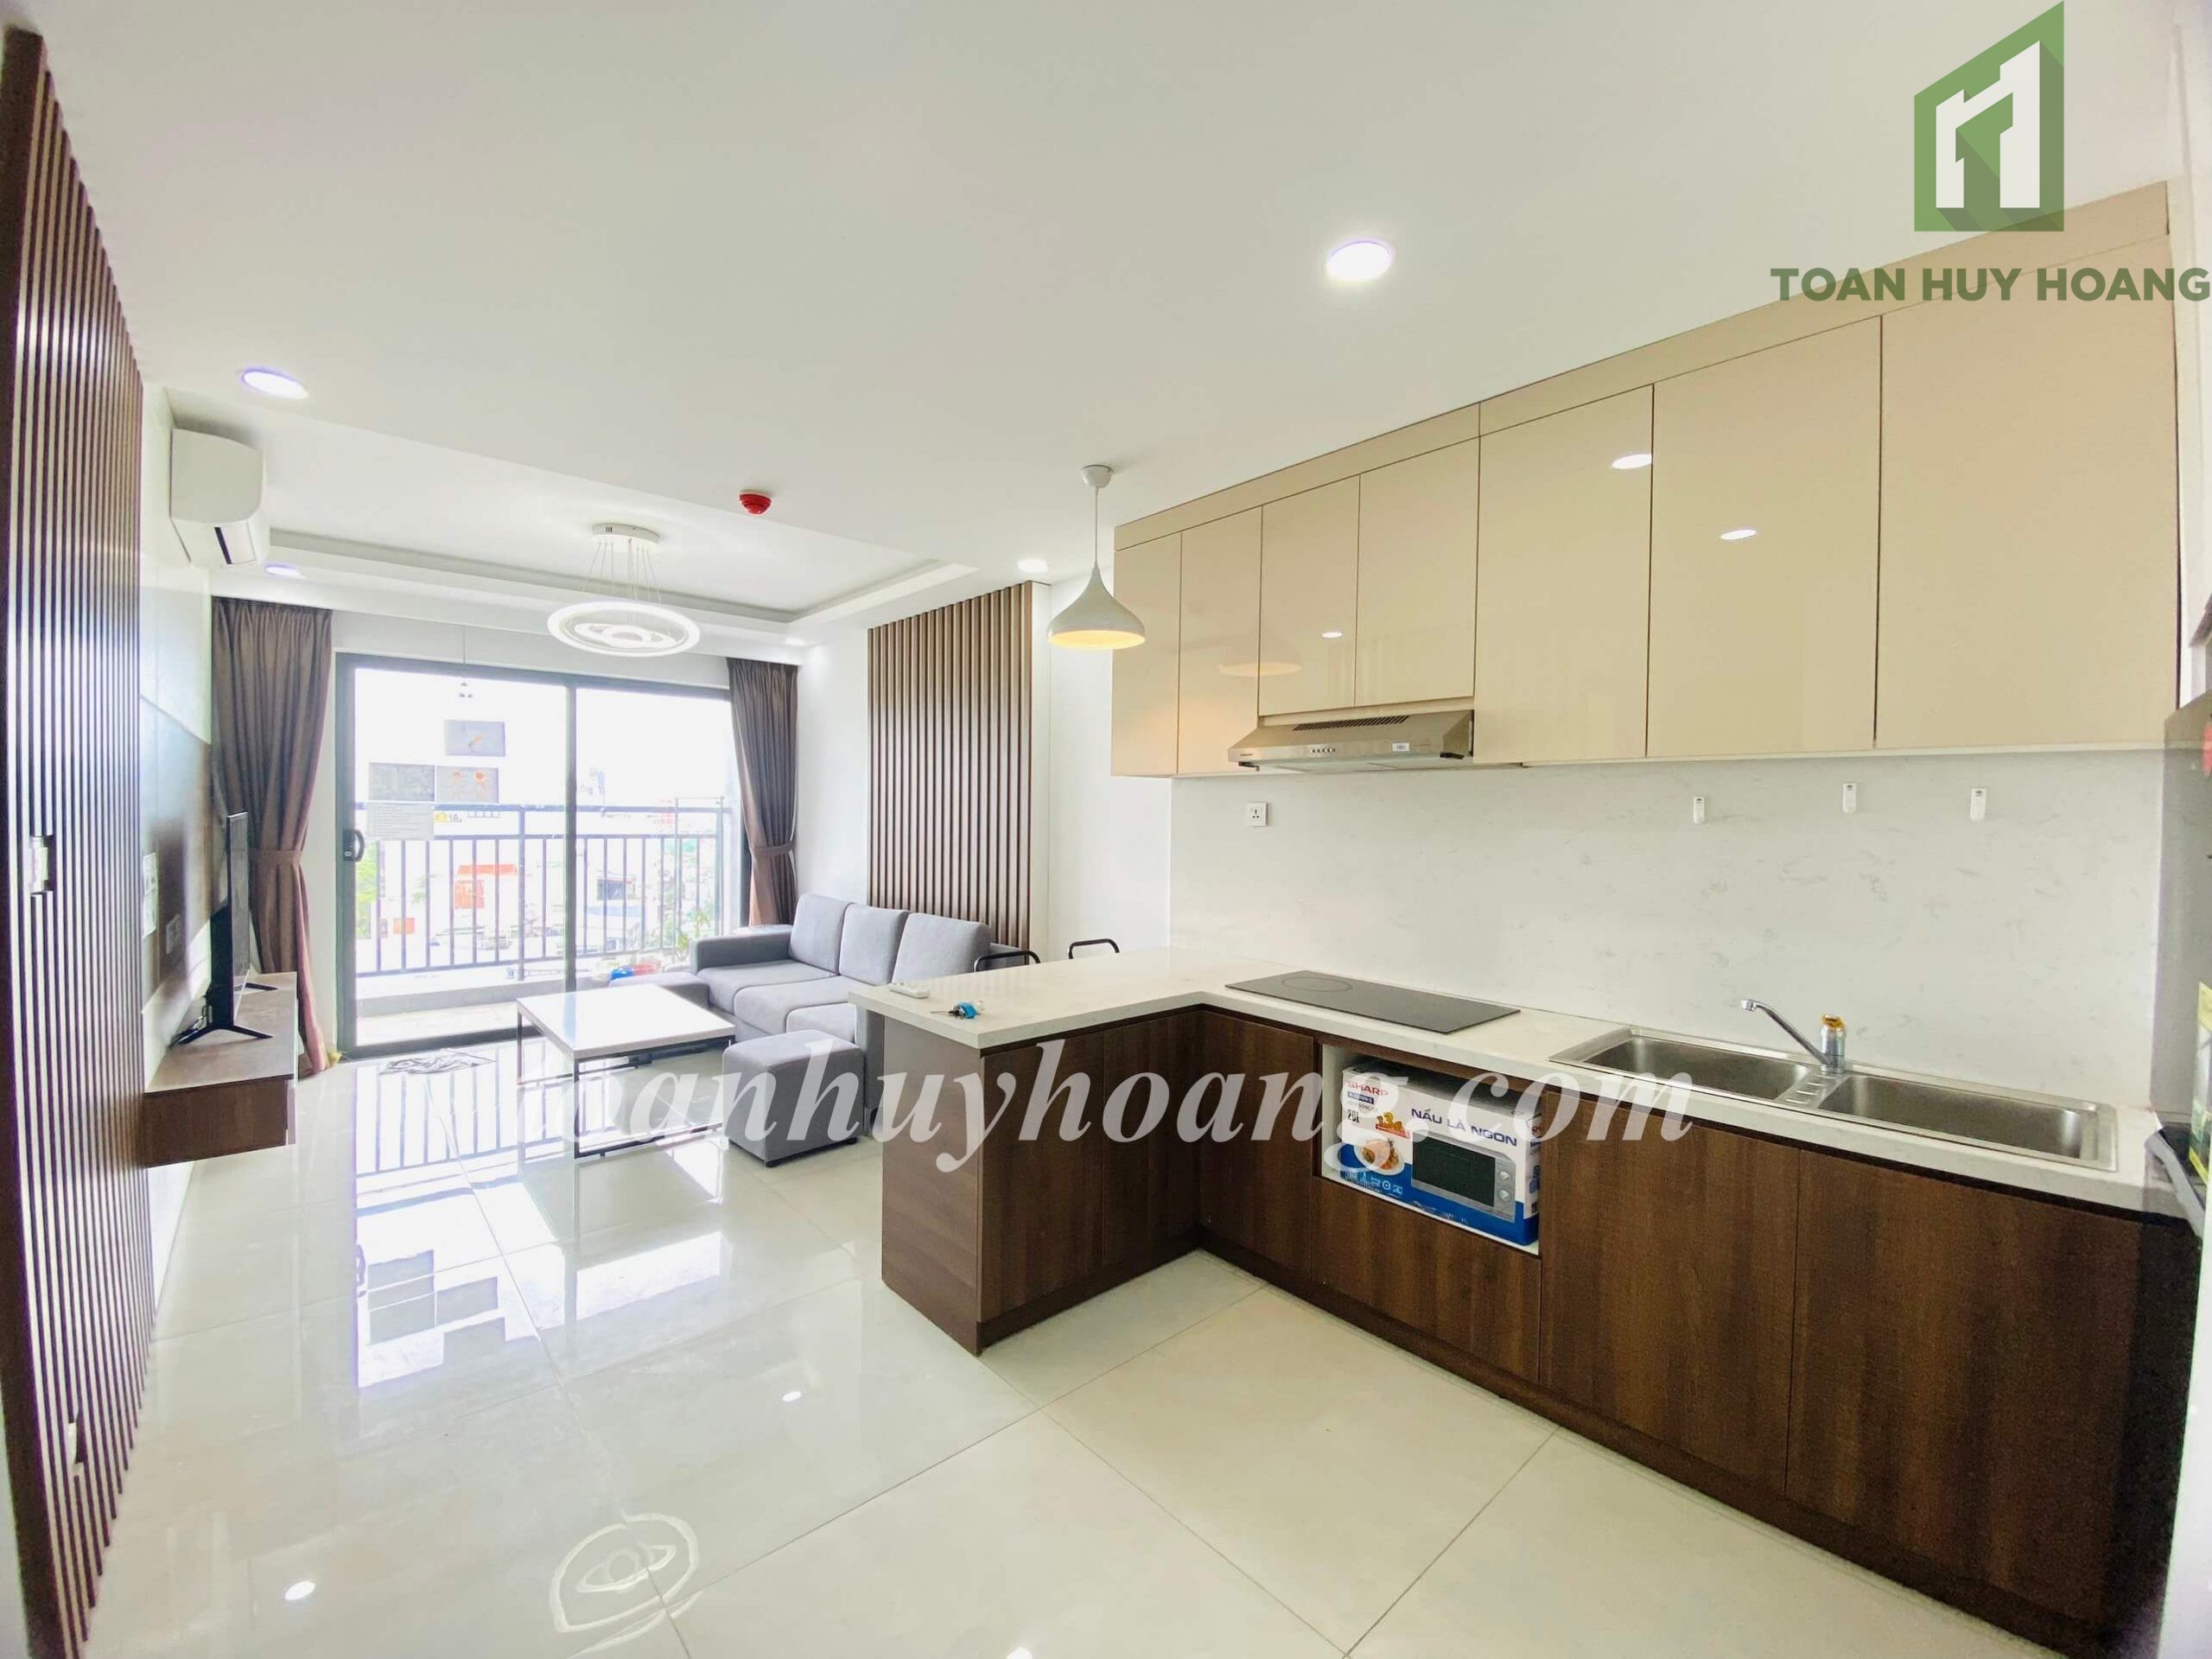 Ultra Natural light flooded in 1 bedroom rental Apartment at The Summit Son Tra